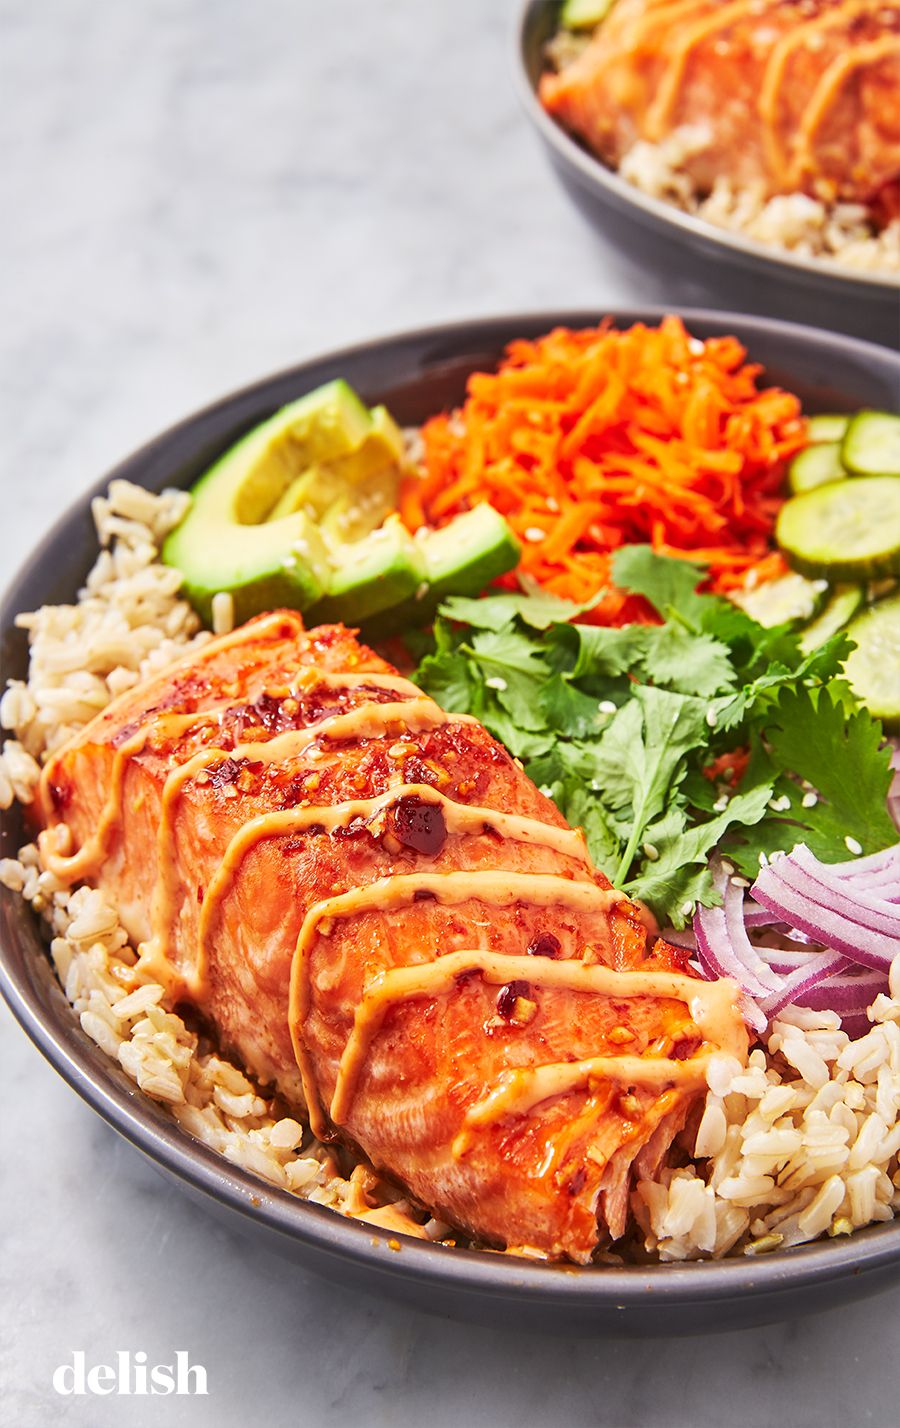 15 Great-Tasting Grain Bowls You Should Pack for Lunch - Brit + Co